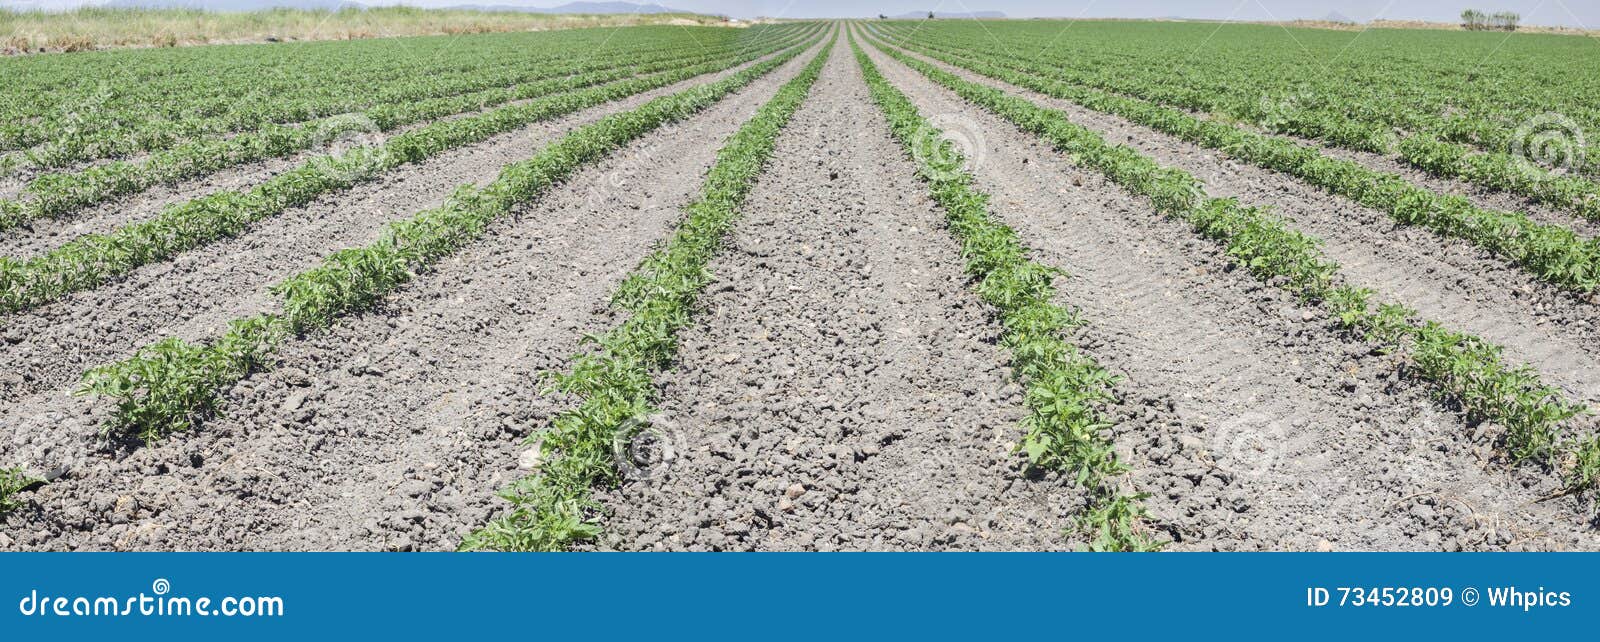 furrows of young tomatoes plants